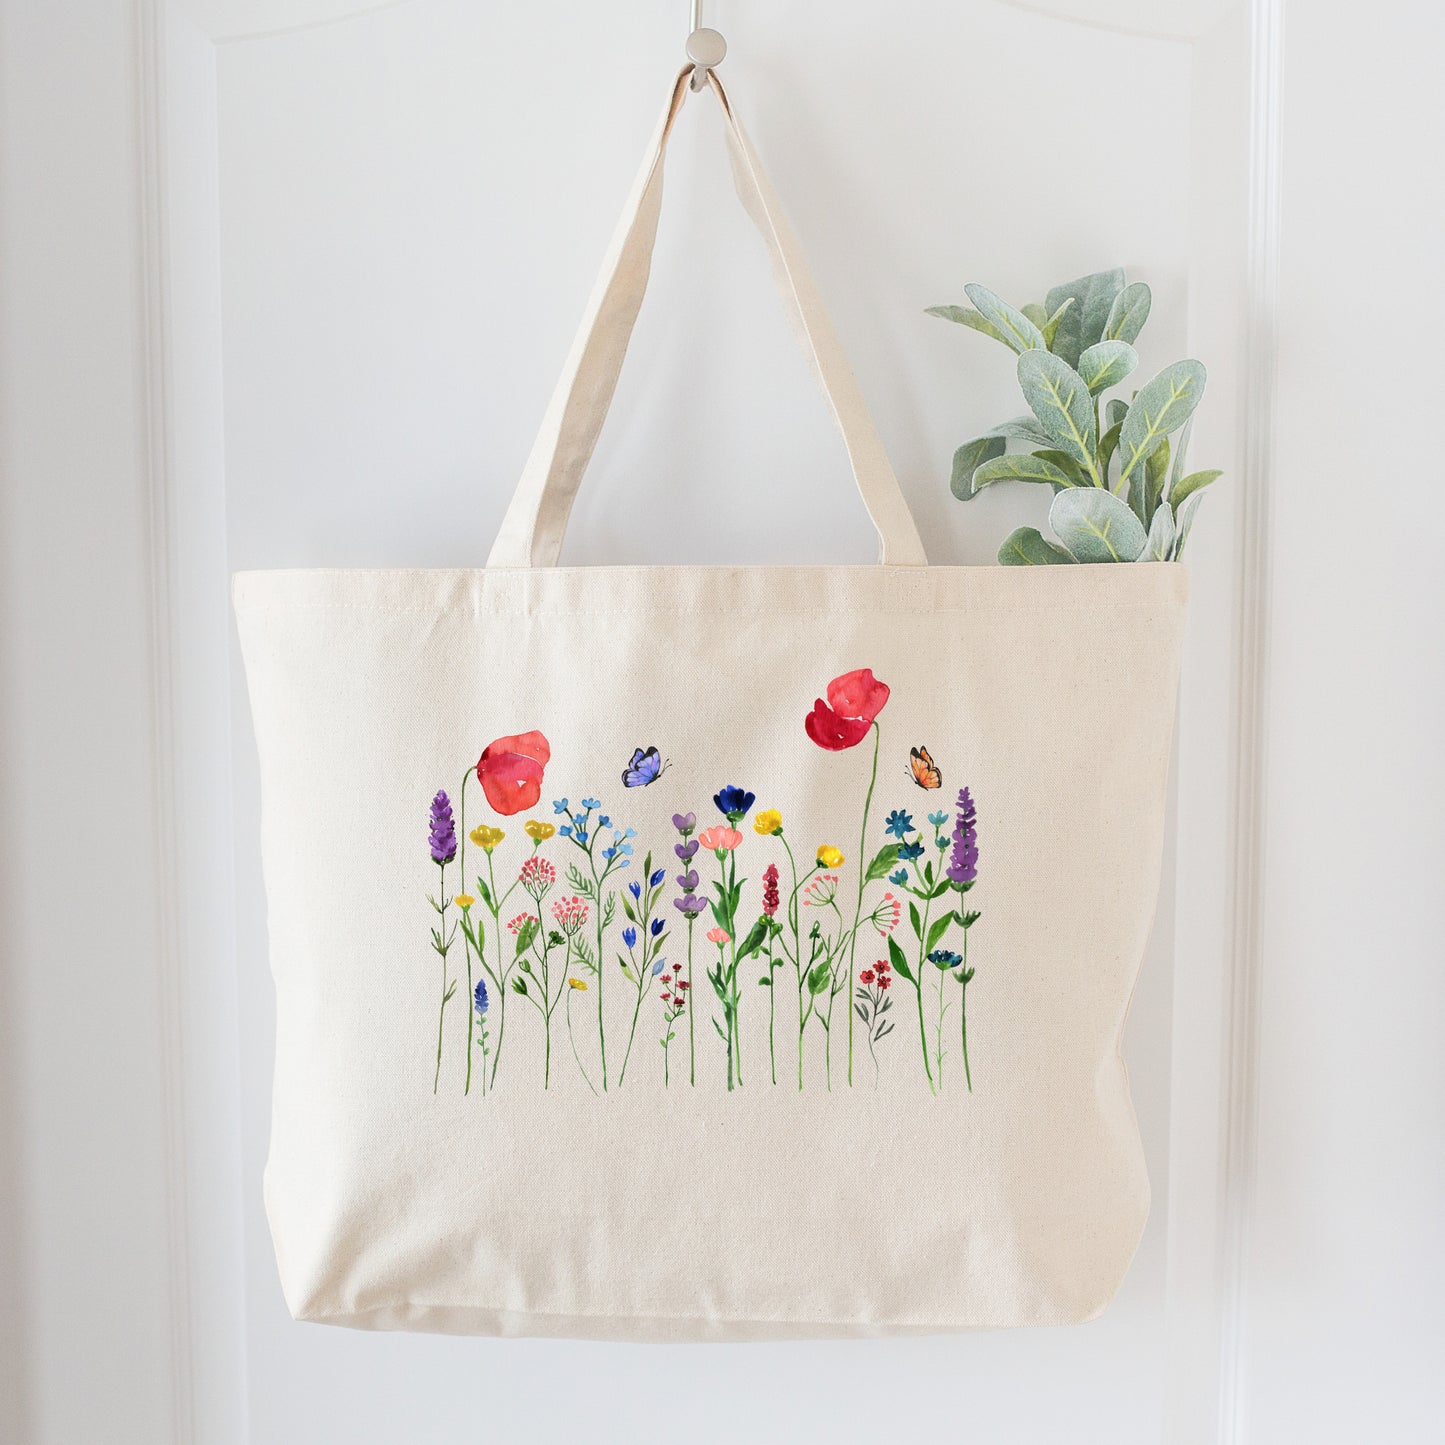 Floral Tote Bag - Flower, Wildflower, Canvas Tote Bag with Zipper, Large, Fabric Shoulder Bag